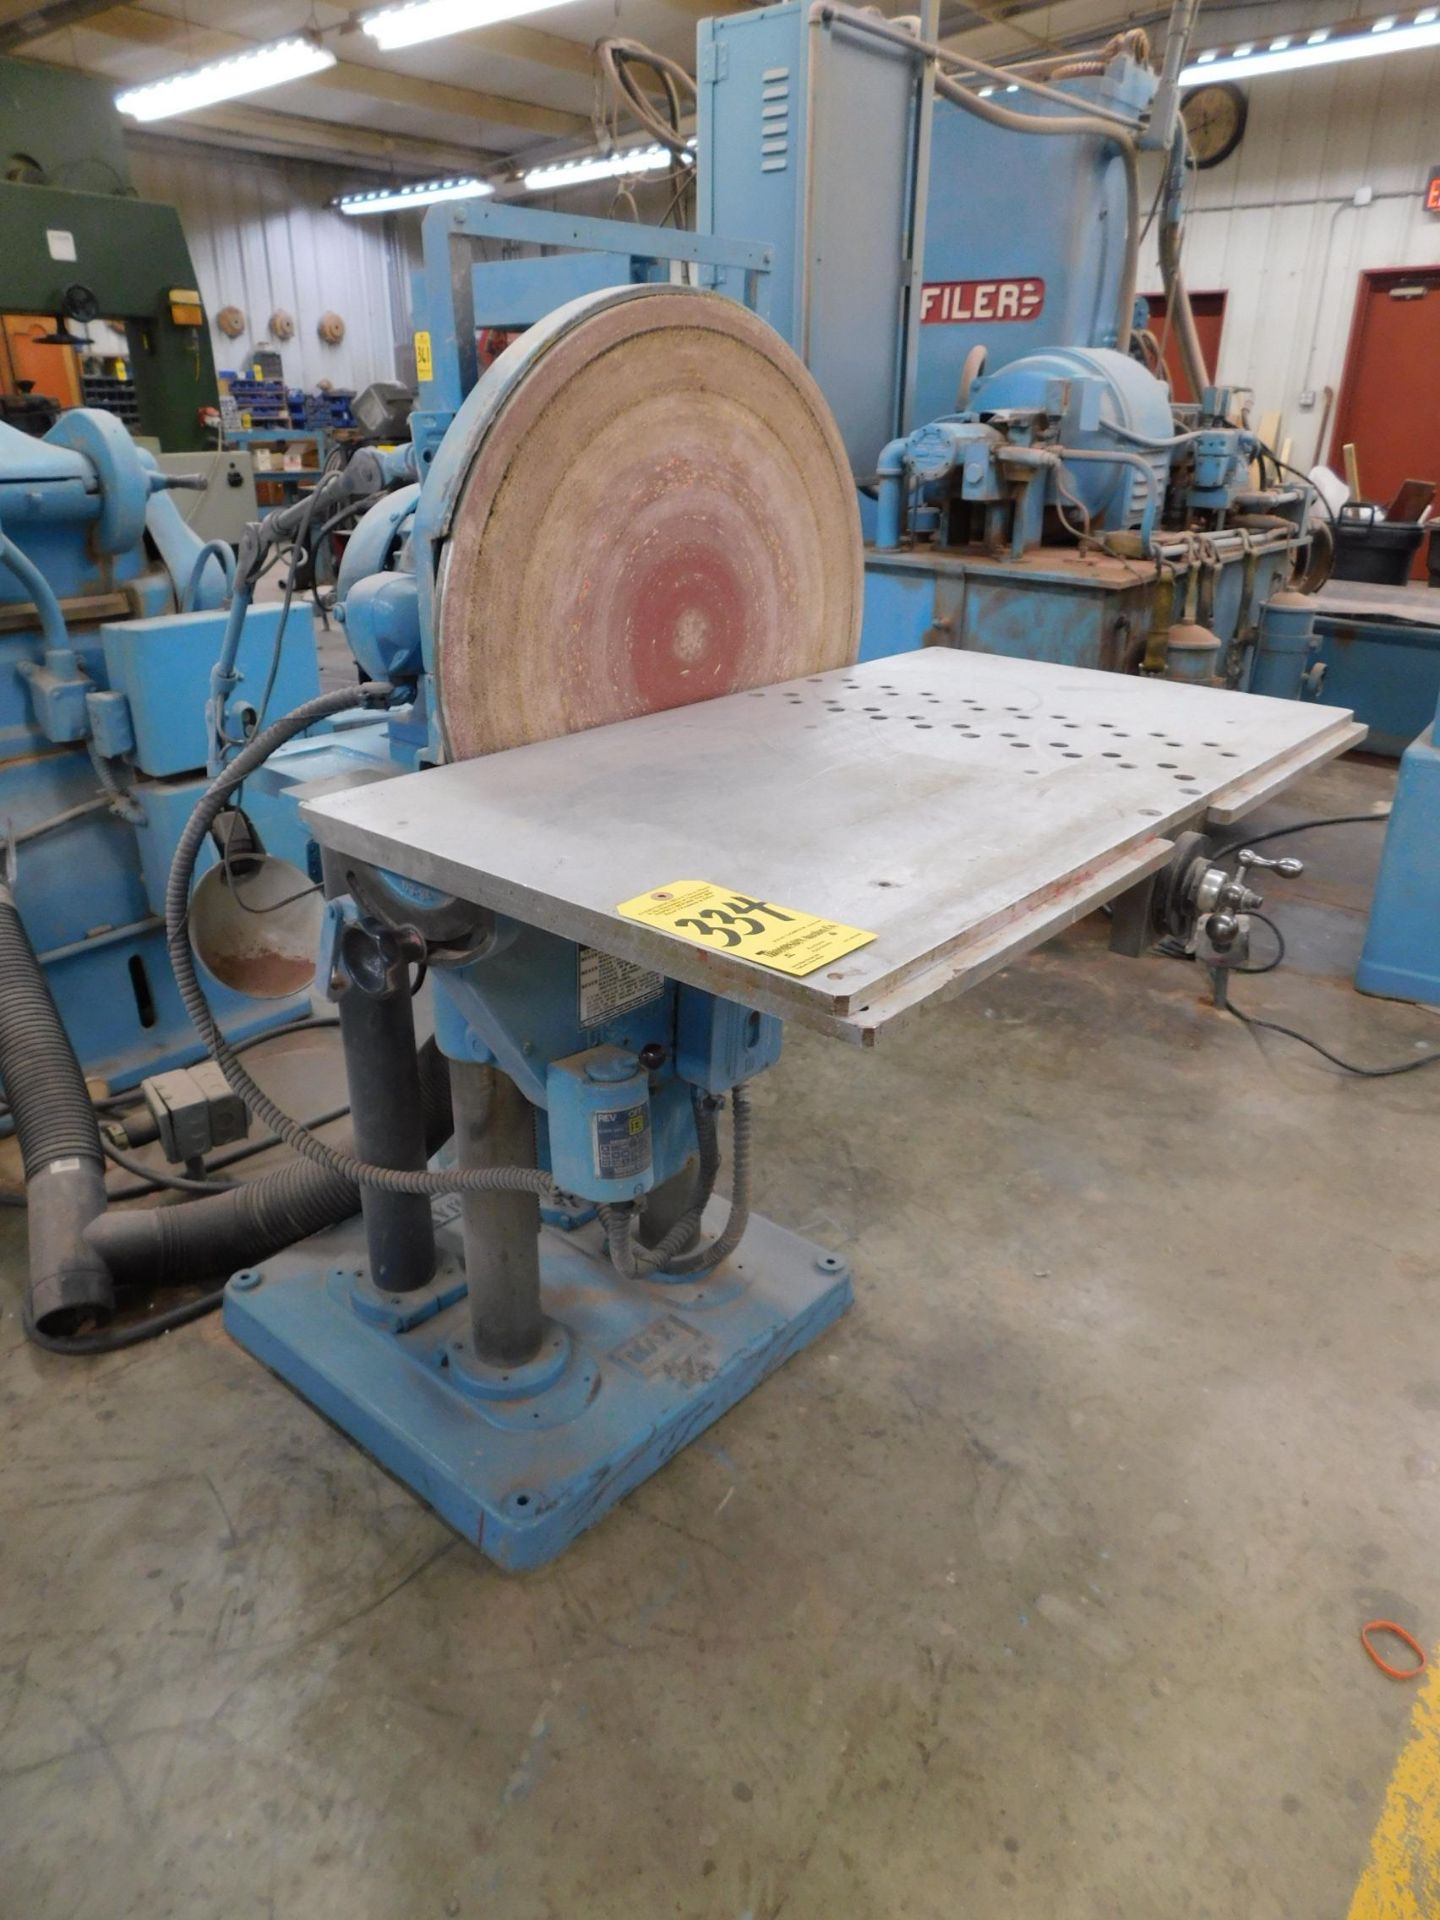 Max Universal 24" Disc Sander with Micrometer Infeed Table, 2 HP, 3 phs.